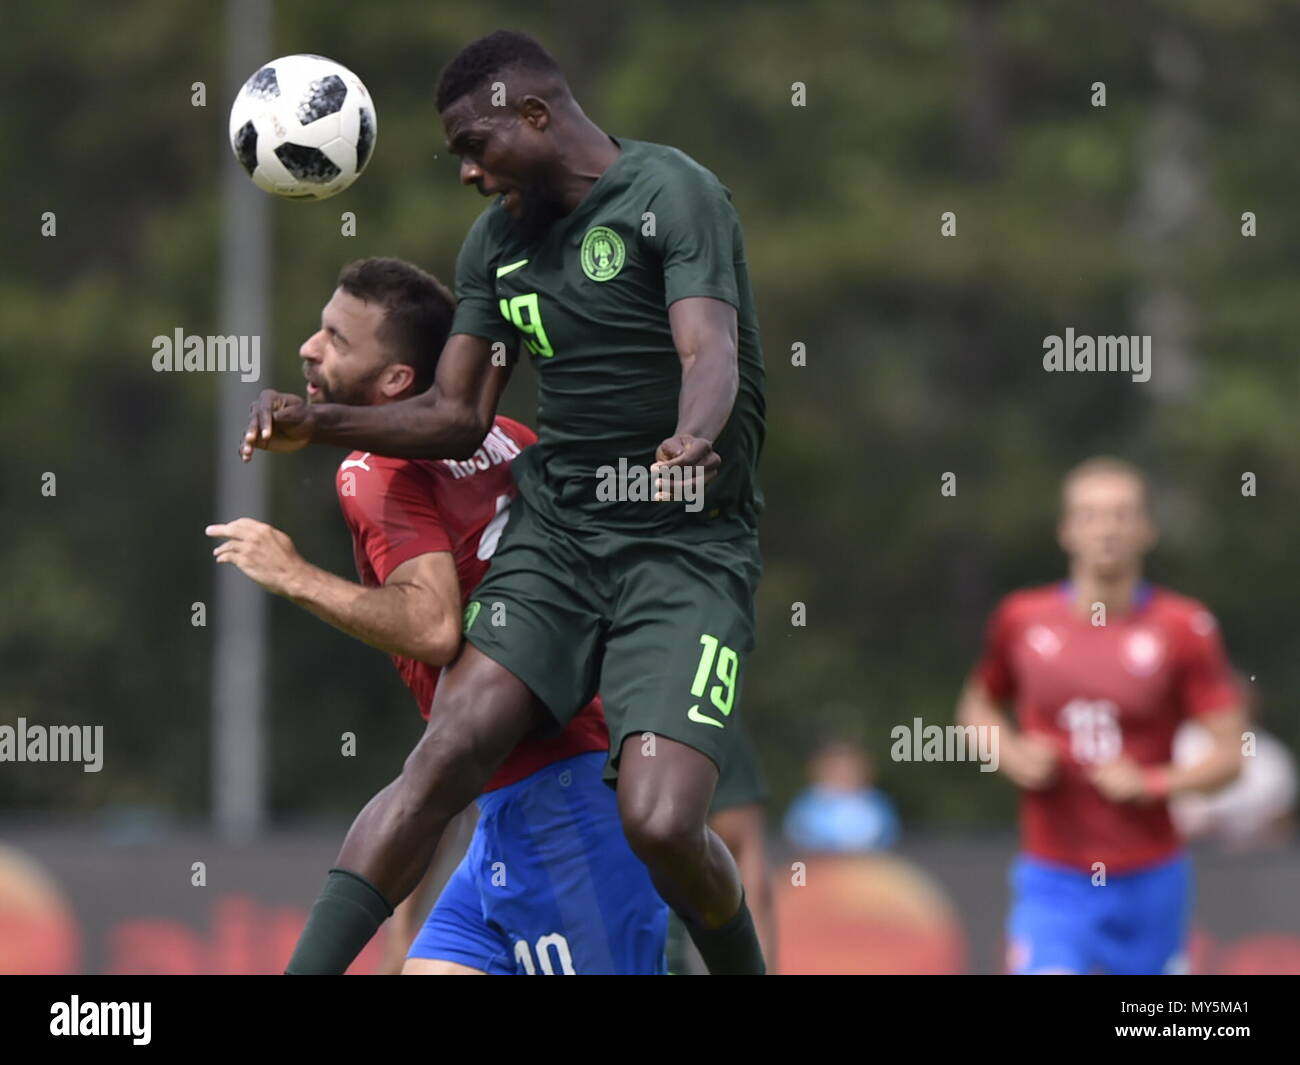 Schwechat, Austria. 06th June, 2018. L-R JOSEF HUSBAUER (CZE) and JOHN OGU (NGA) in action during the warm-up match Czech Republic vs Nigeria, in Schwechat, Austria, on June 6, 2018. Credit: Lubos Pavlicek/CTK Photo/Alamy Live News Stock Photo